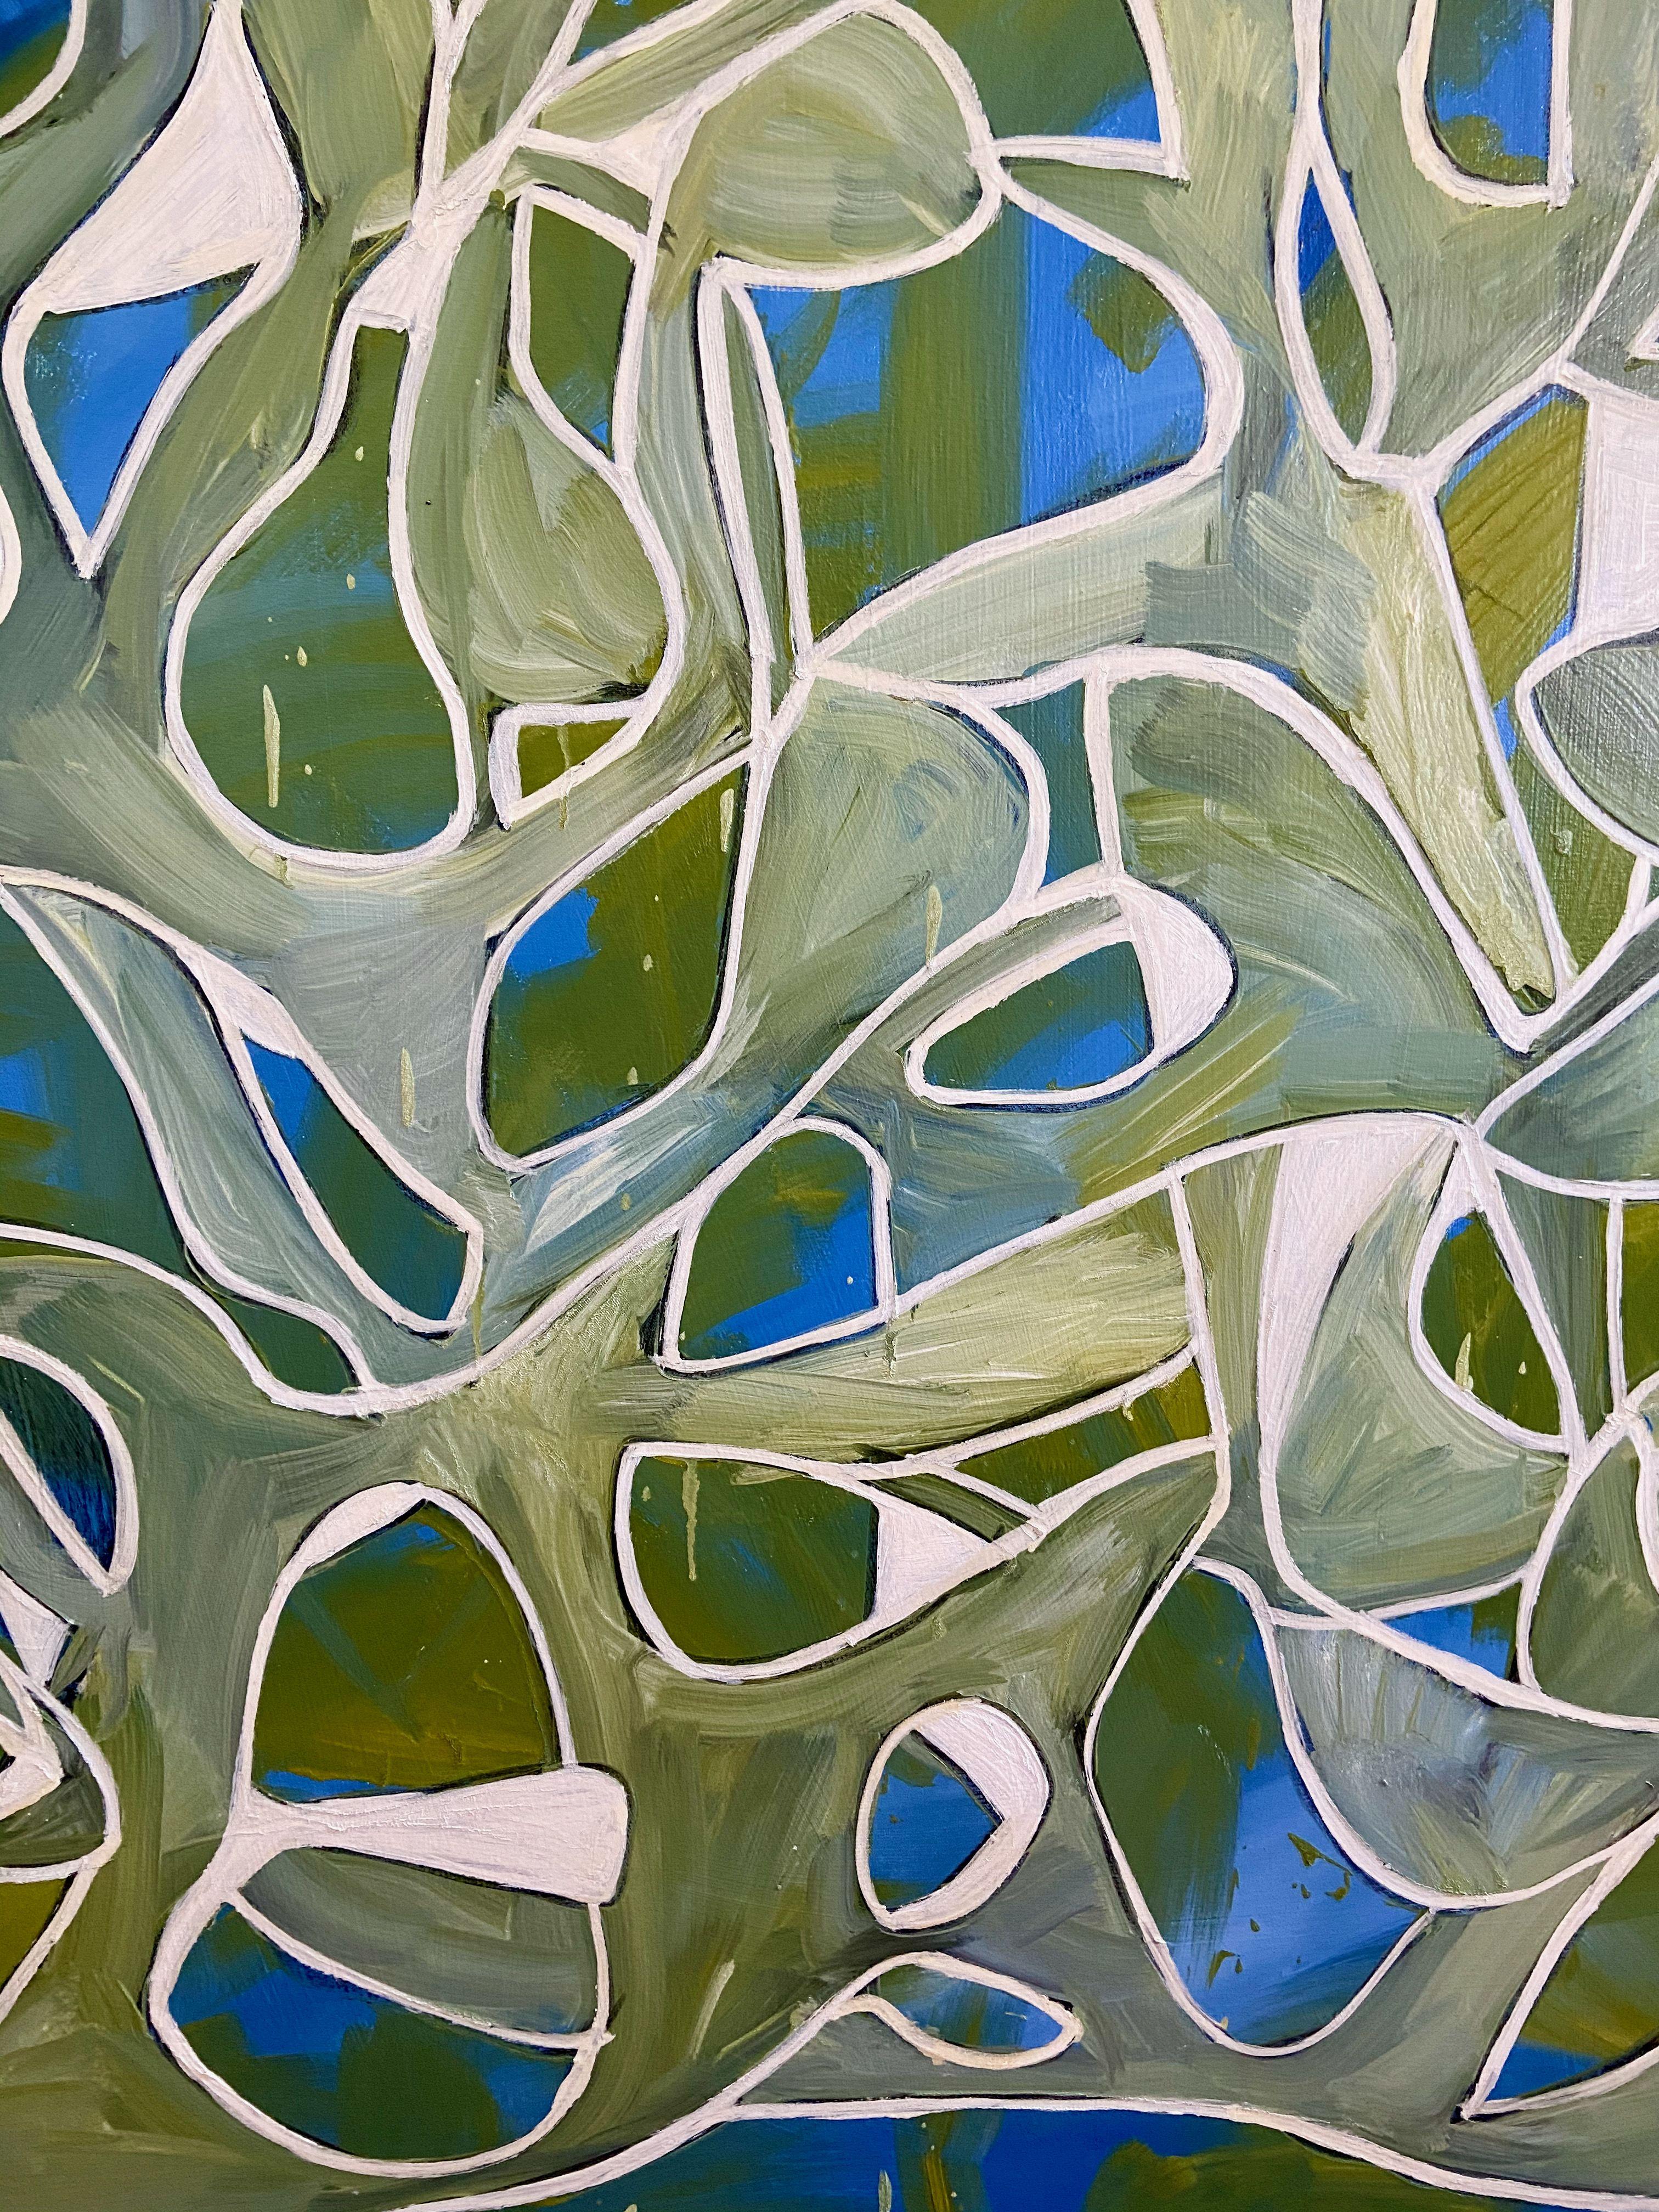 Oil on canvas abstract inspired by natural elements. My abstract paintings are all about creating excitement for the viewer through concentrated exploration. Each painting is inspired by nature, travels, or imagination and created to embody